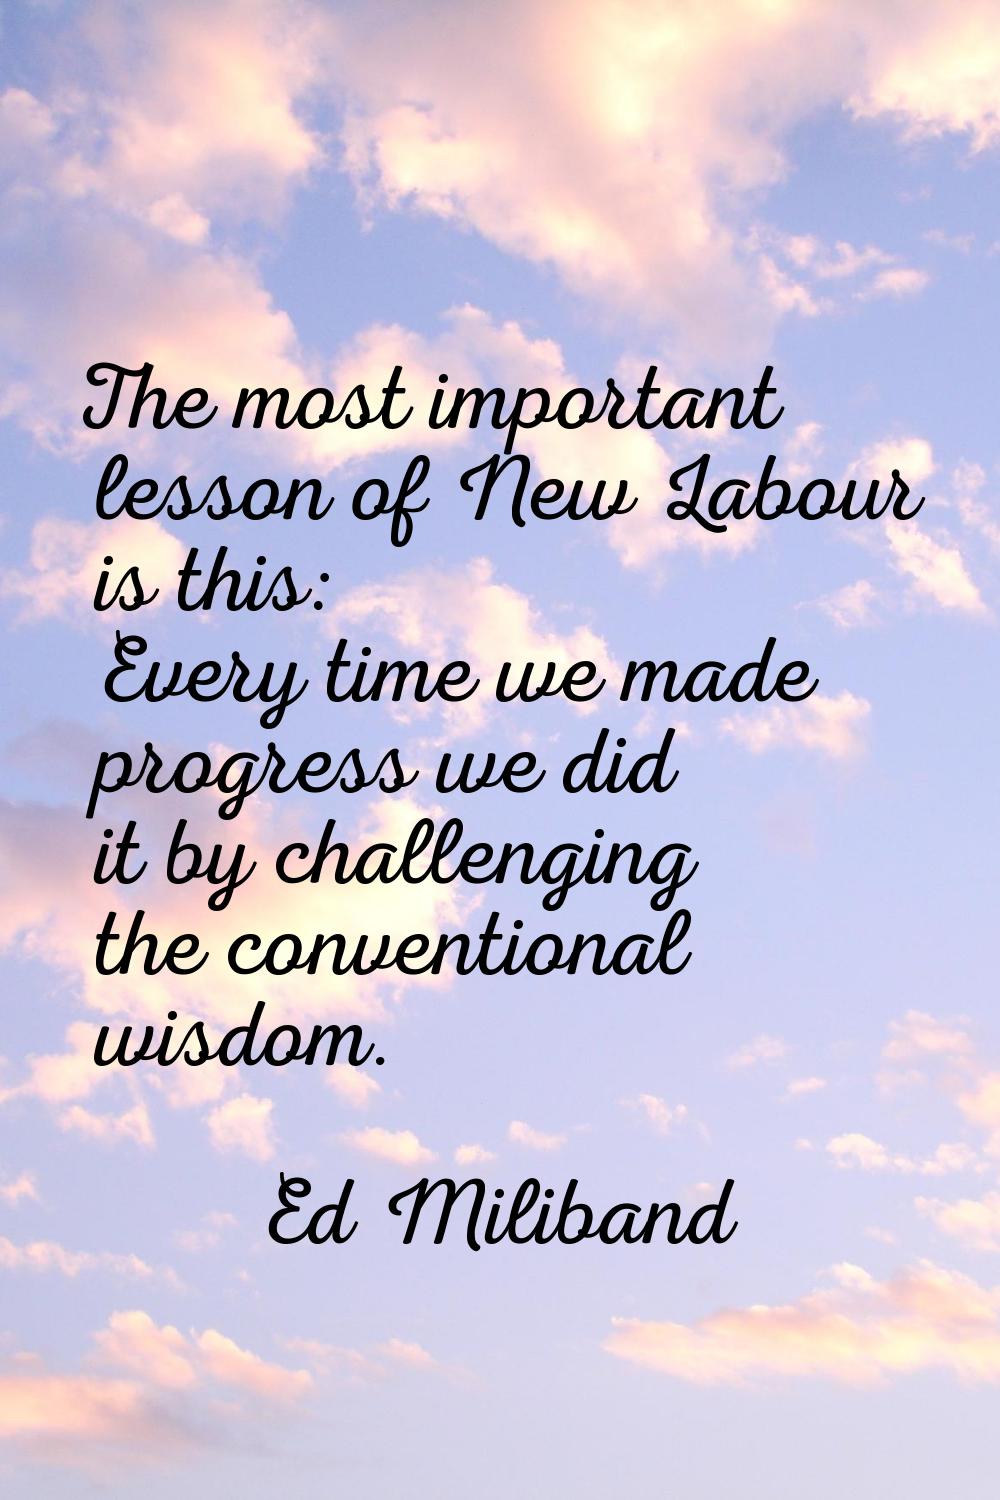 The most important lesson of New Labour is this: Every time we made progress we did it by challengi